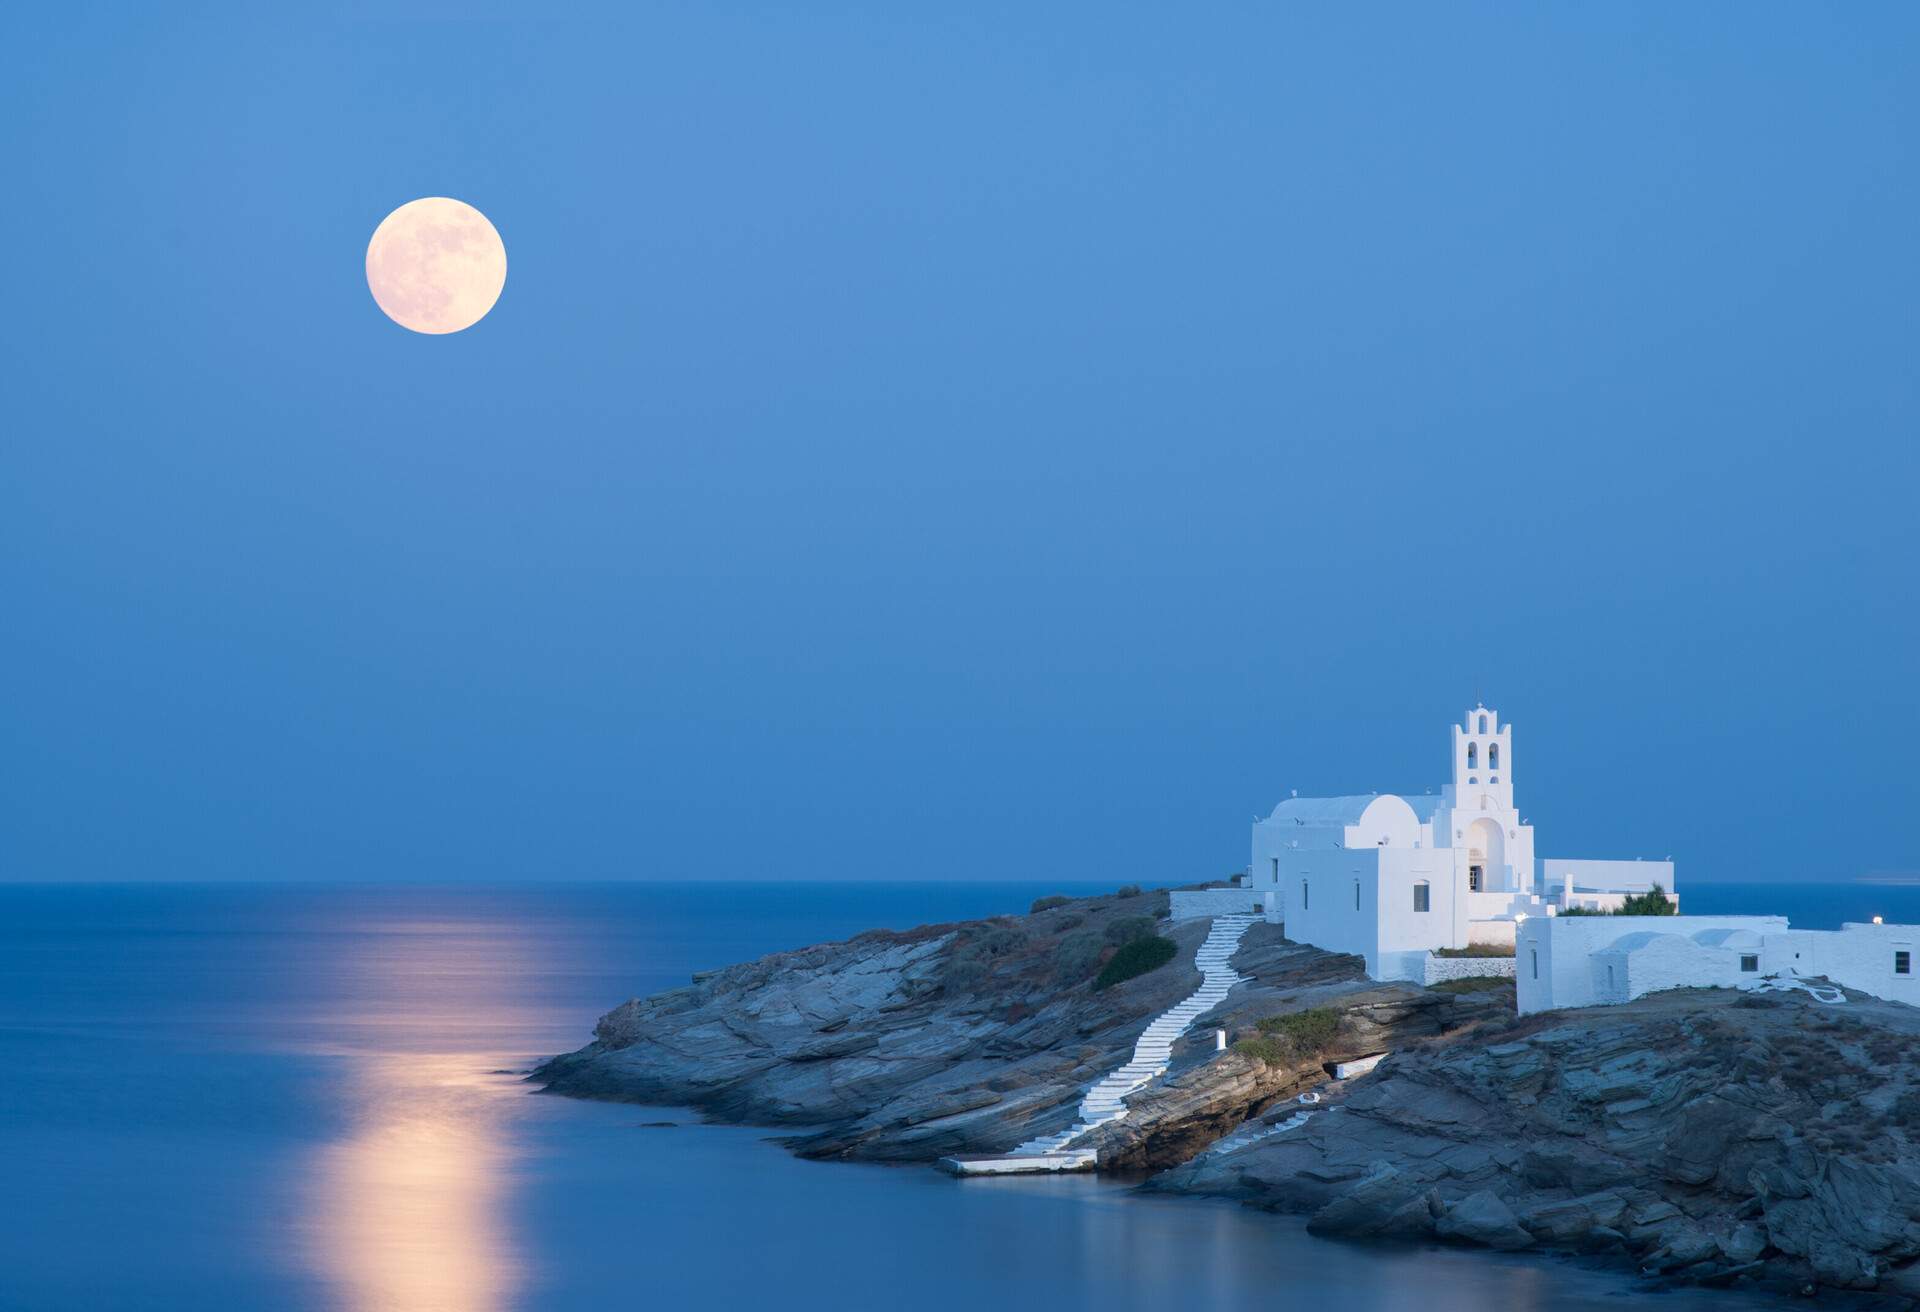 A summer picture of the island Sifnos with the full moon and its reflections on the Aegean Sea. The famous church of Panagia Chrysopigi on the foreground.